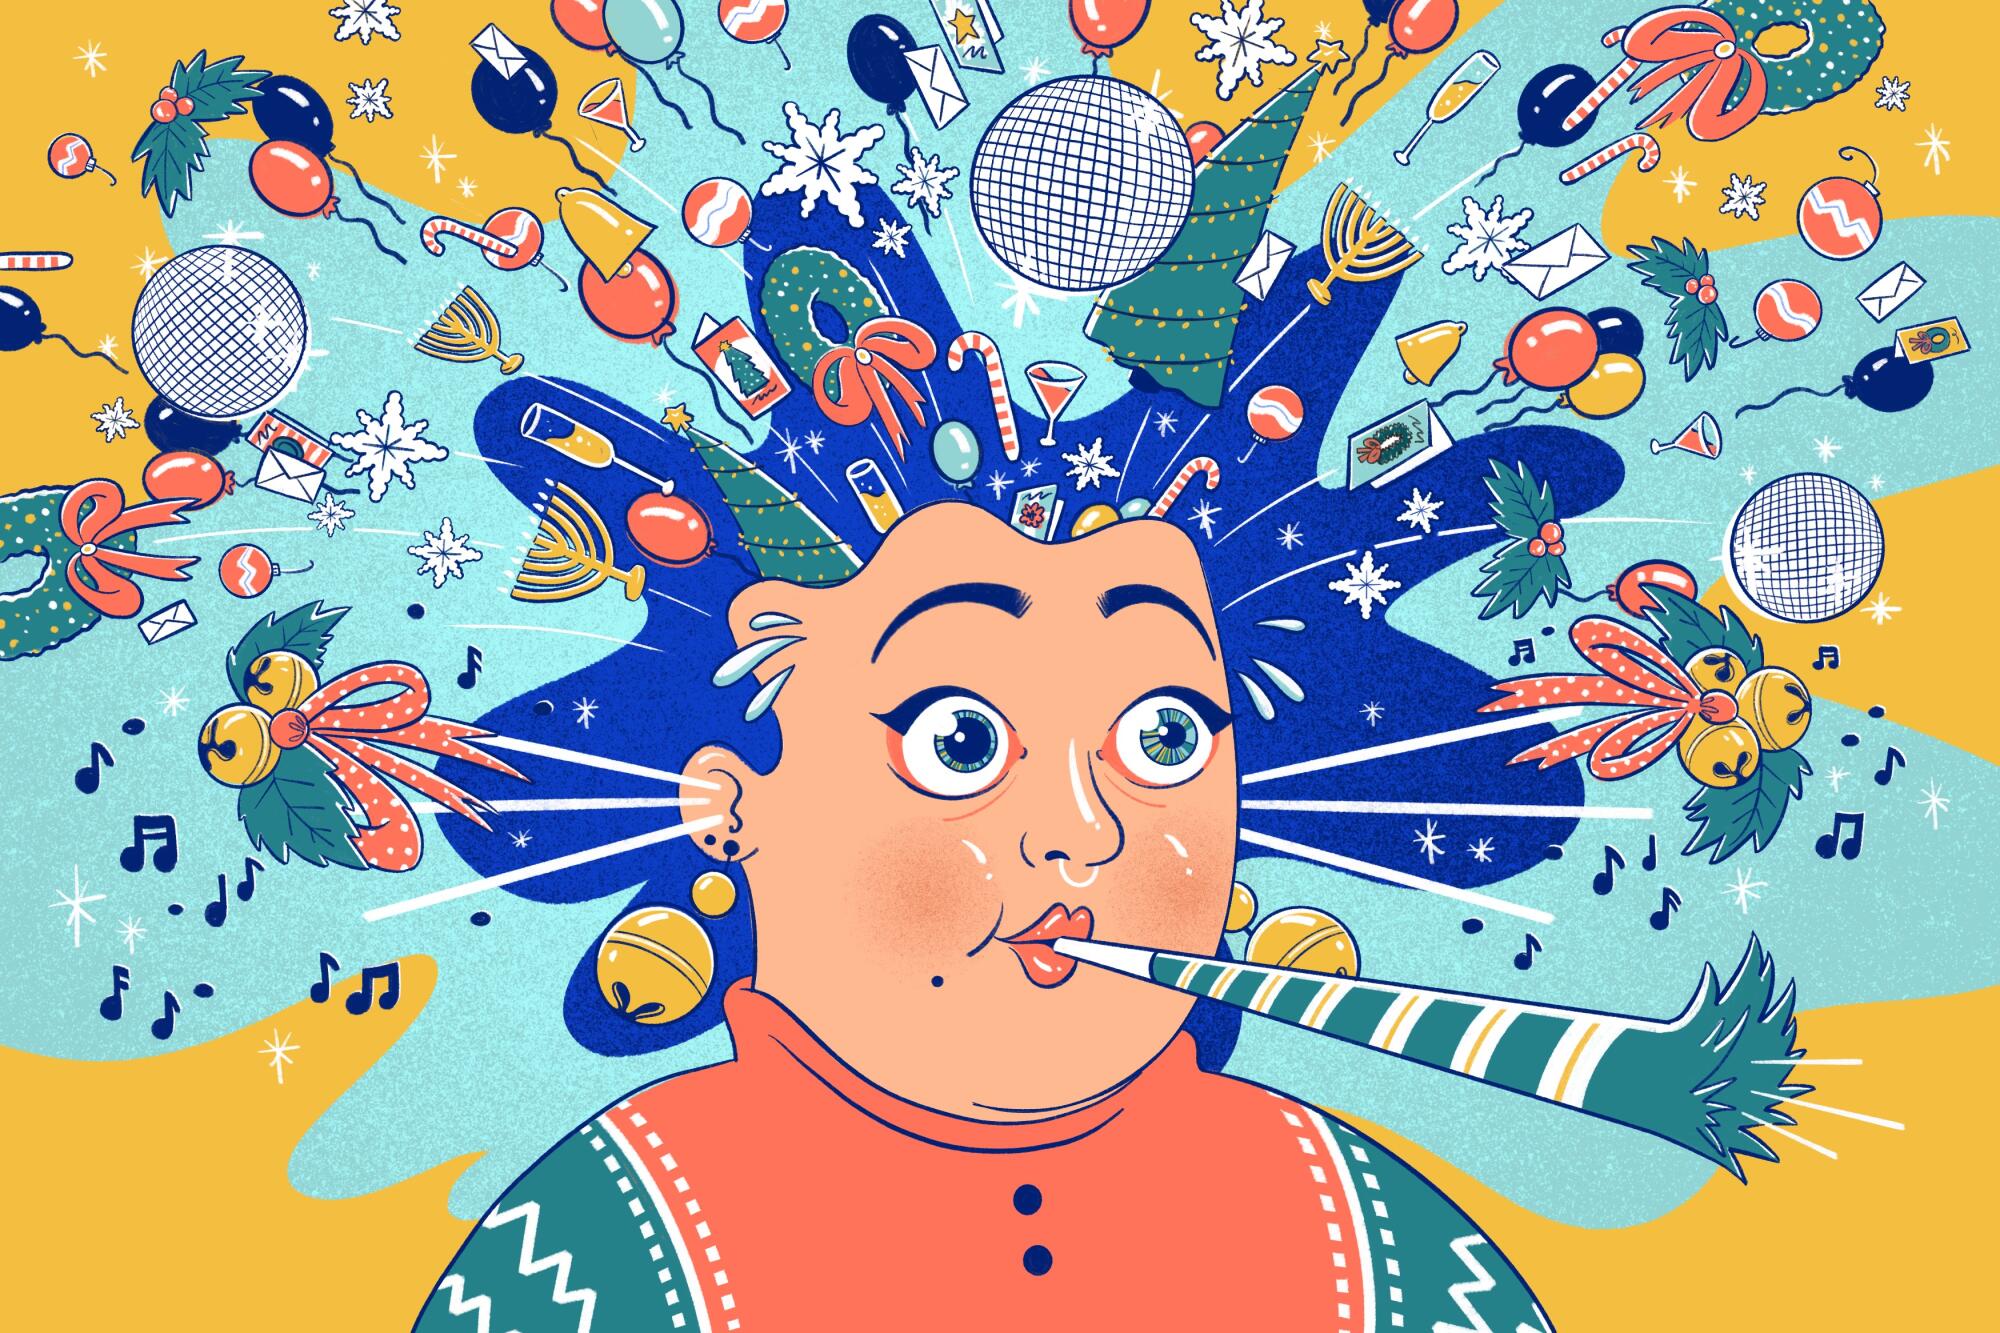 Illustration of a woman with her head exploding filled with holiday objects and symbols